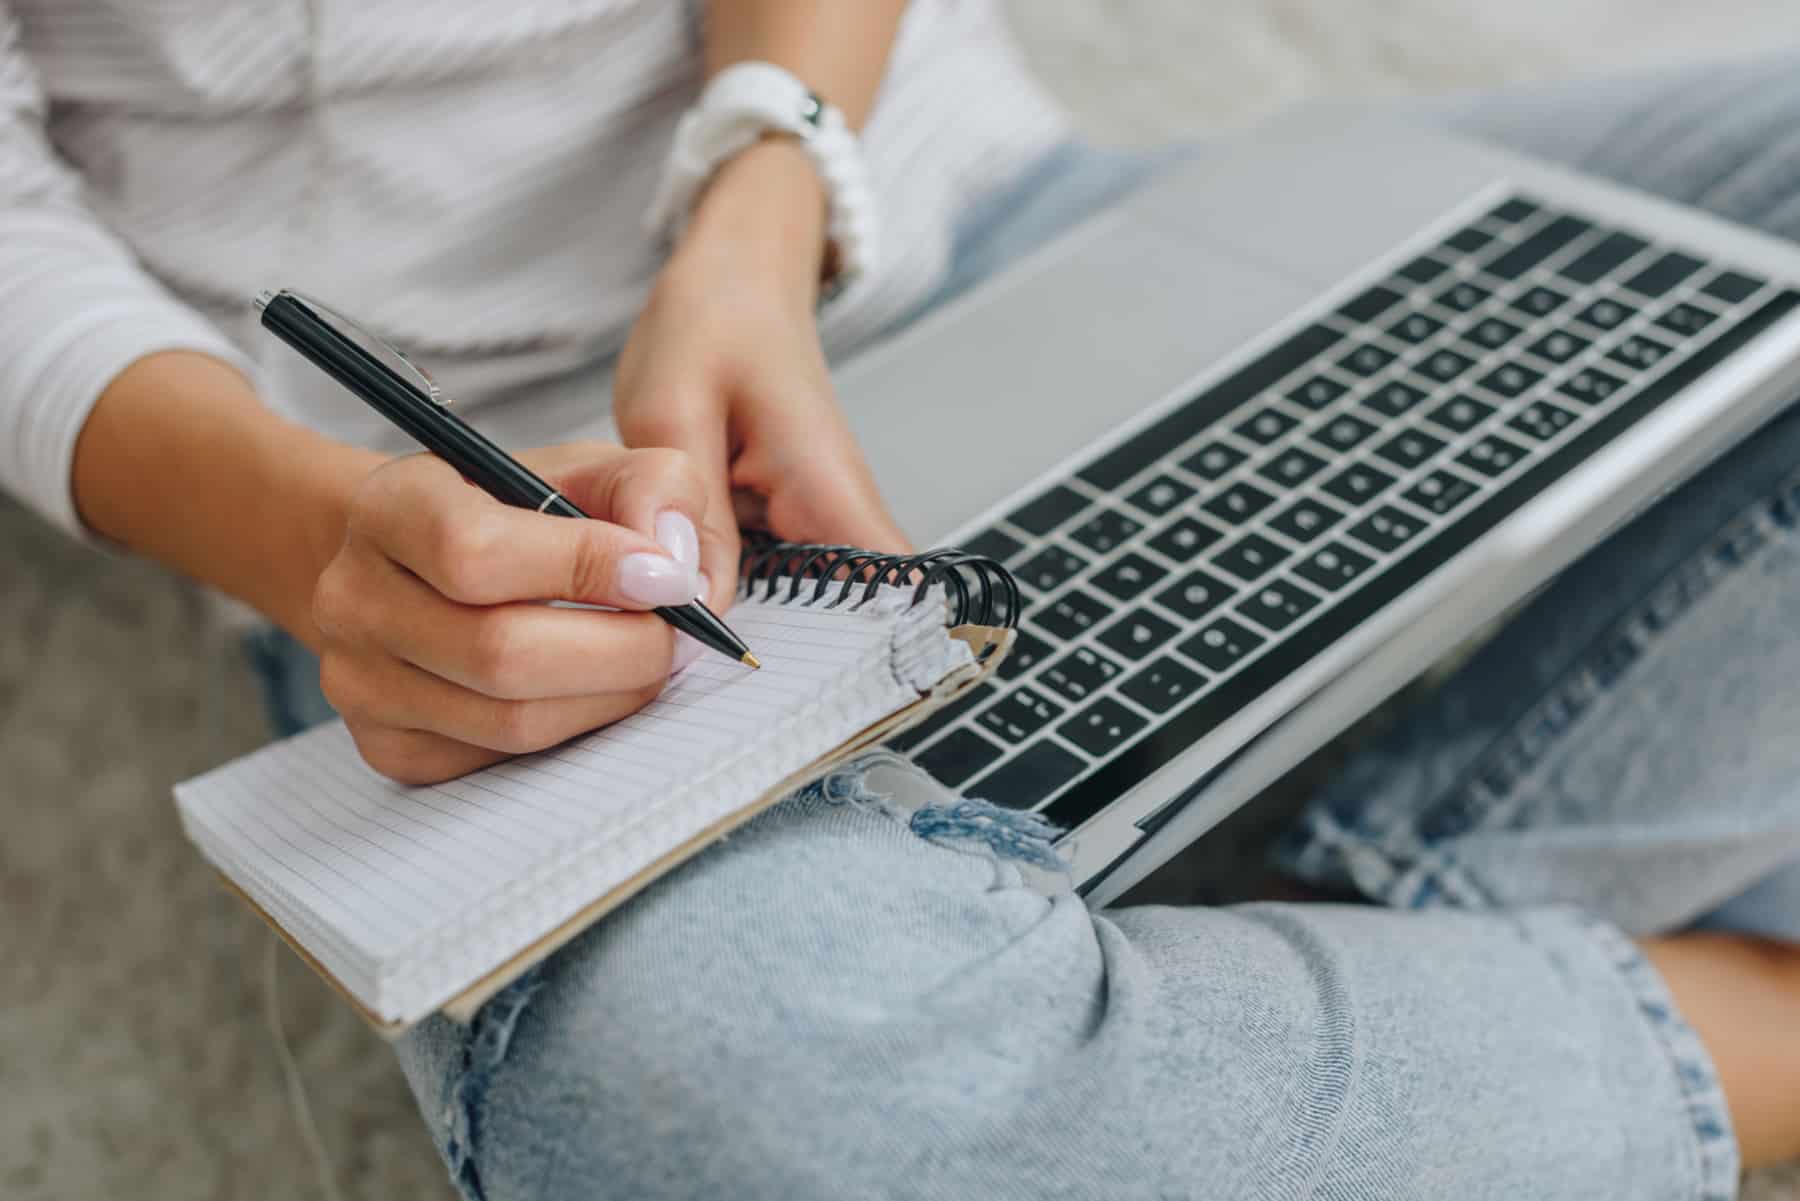 Woman writing in notebook with laptop on lap